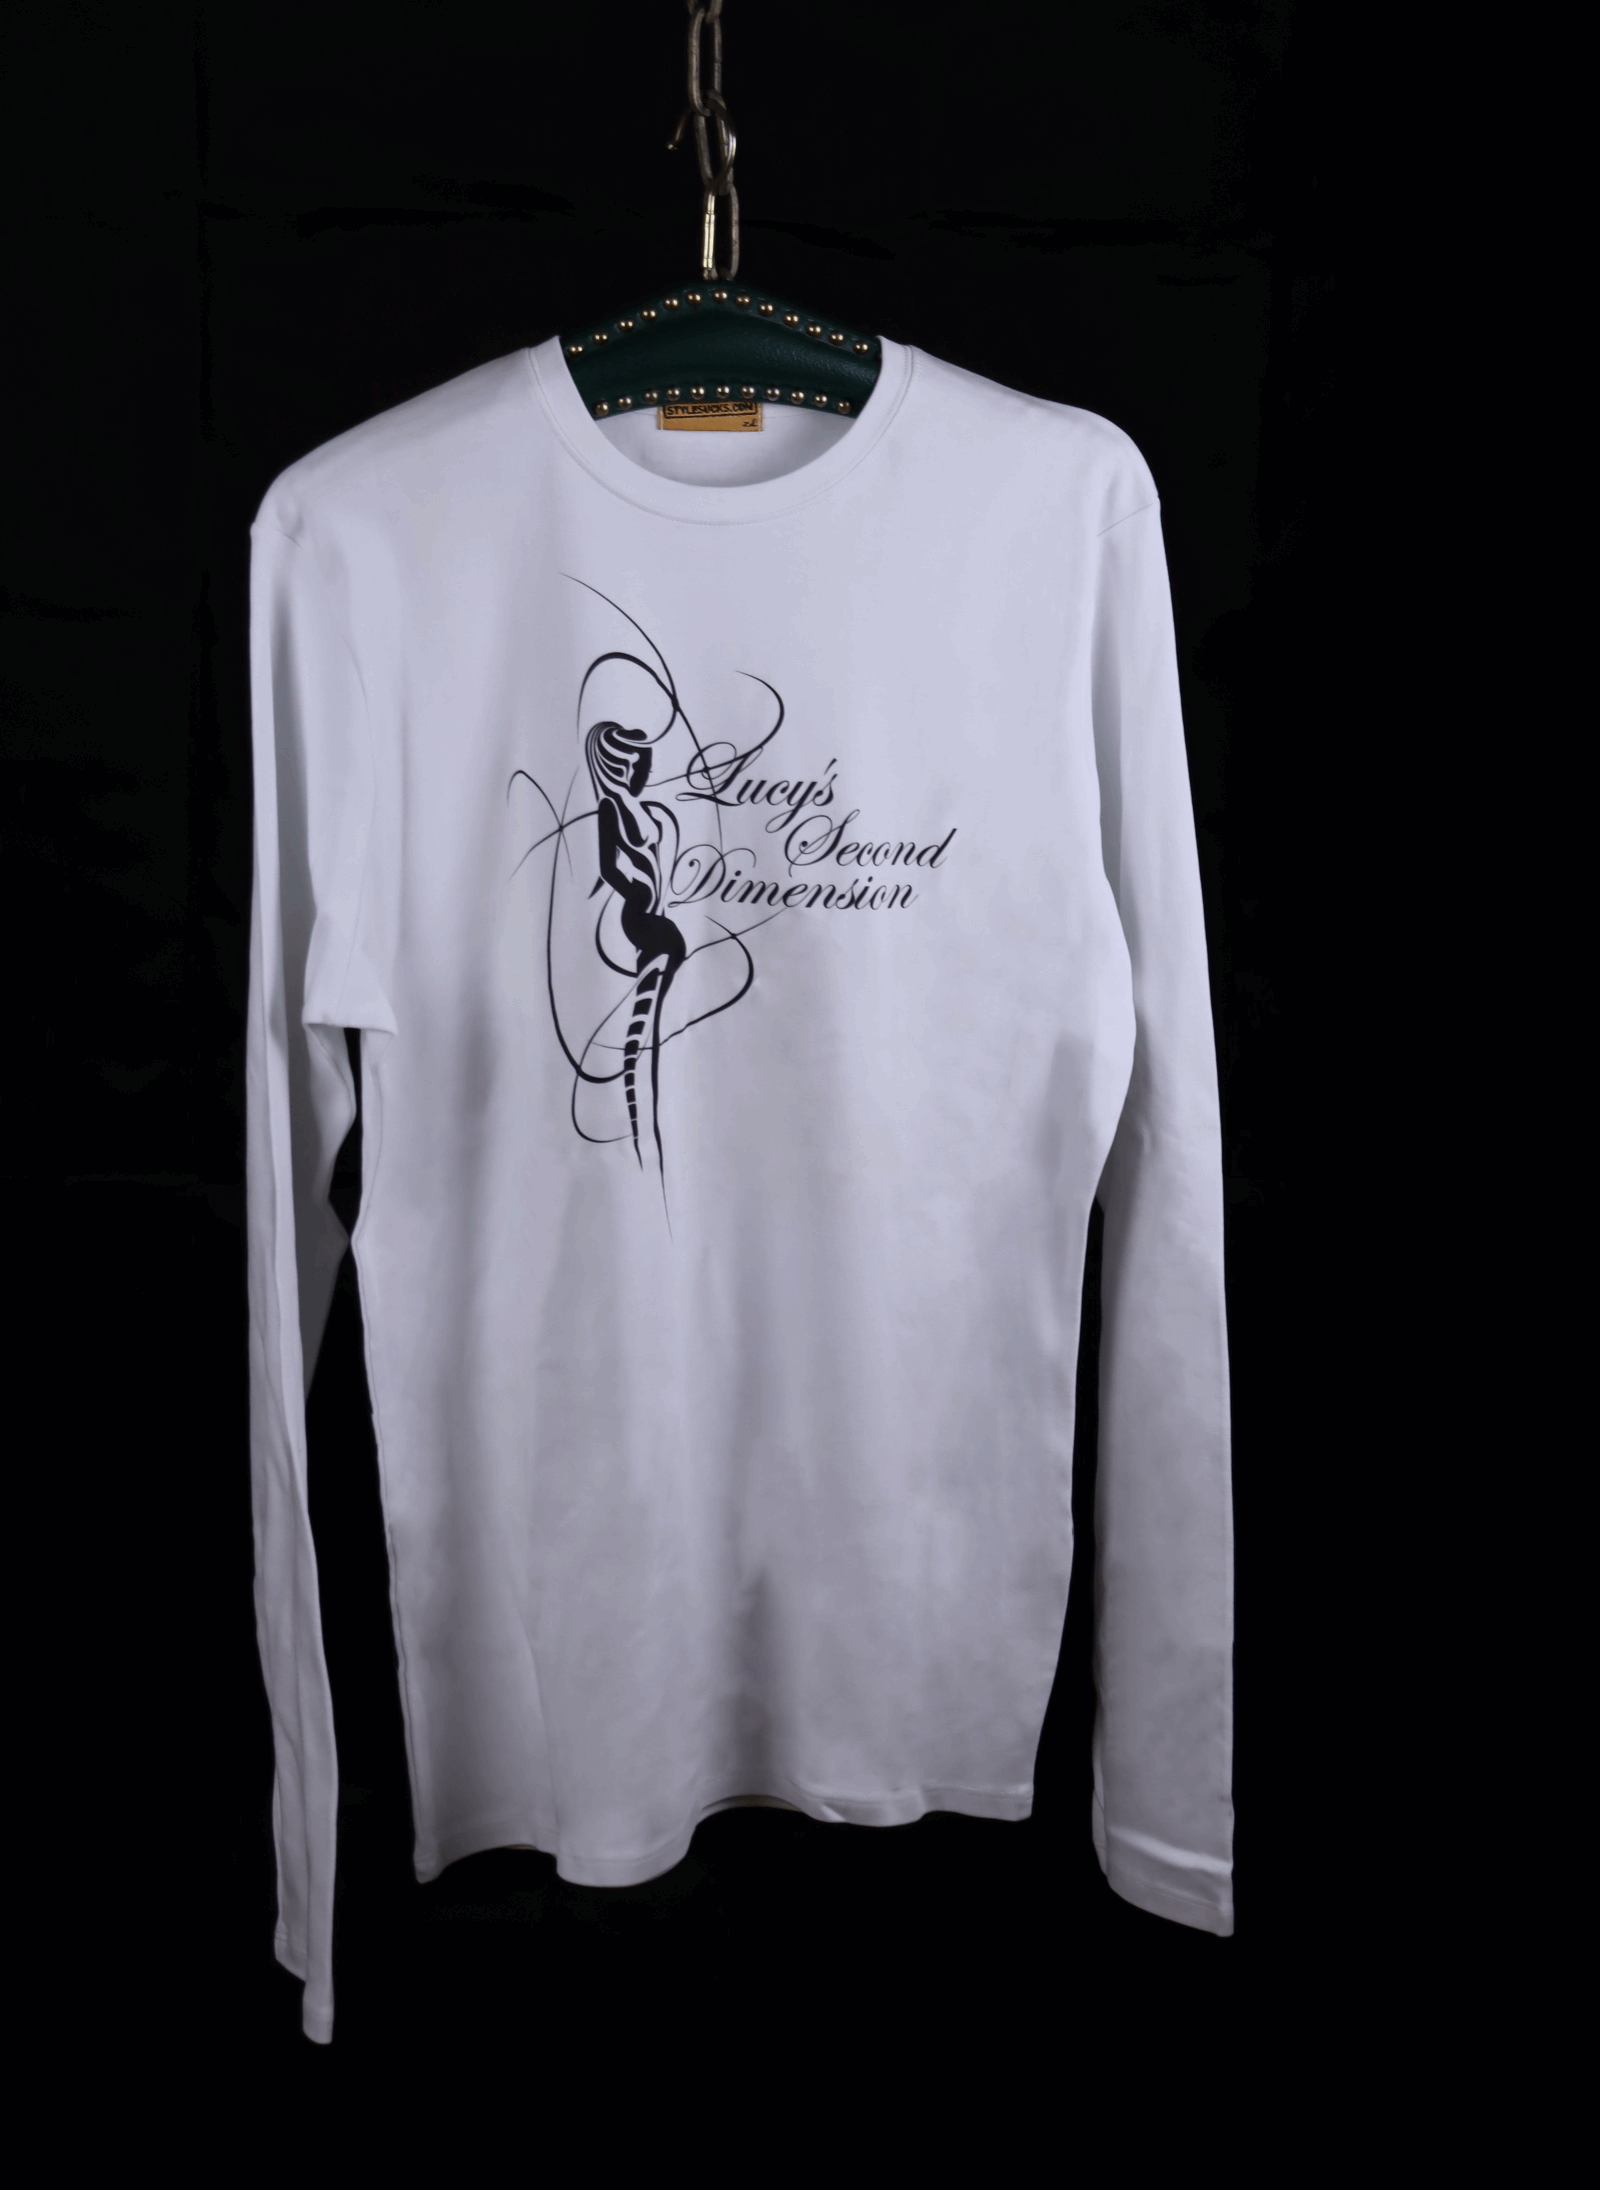 Lucy´s second dimension long sleeve